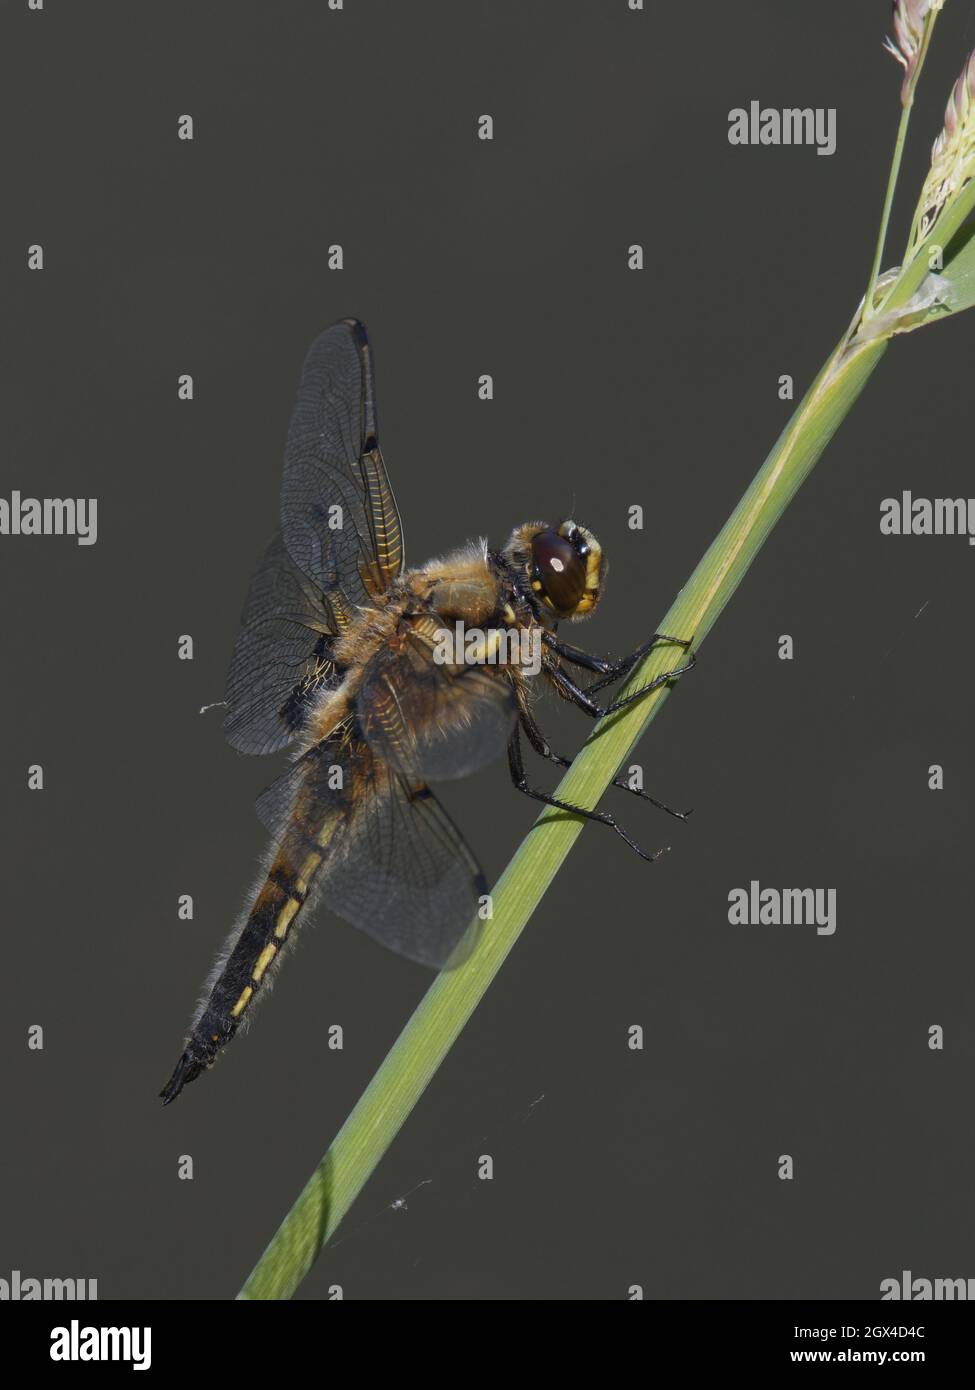 Four Spotted Chaser Dragonfly - Perched Libellula quadrimaculata Essex,UK IN001969 Stock Photo